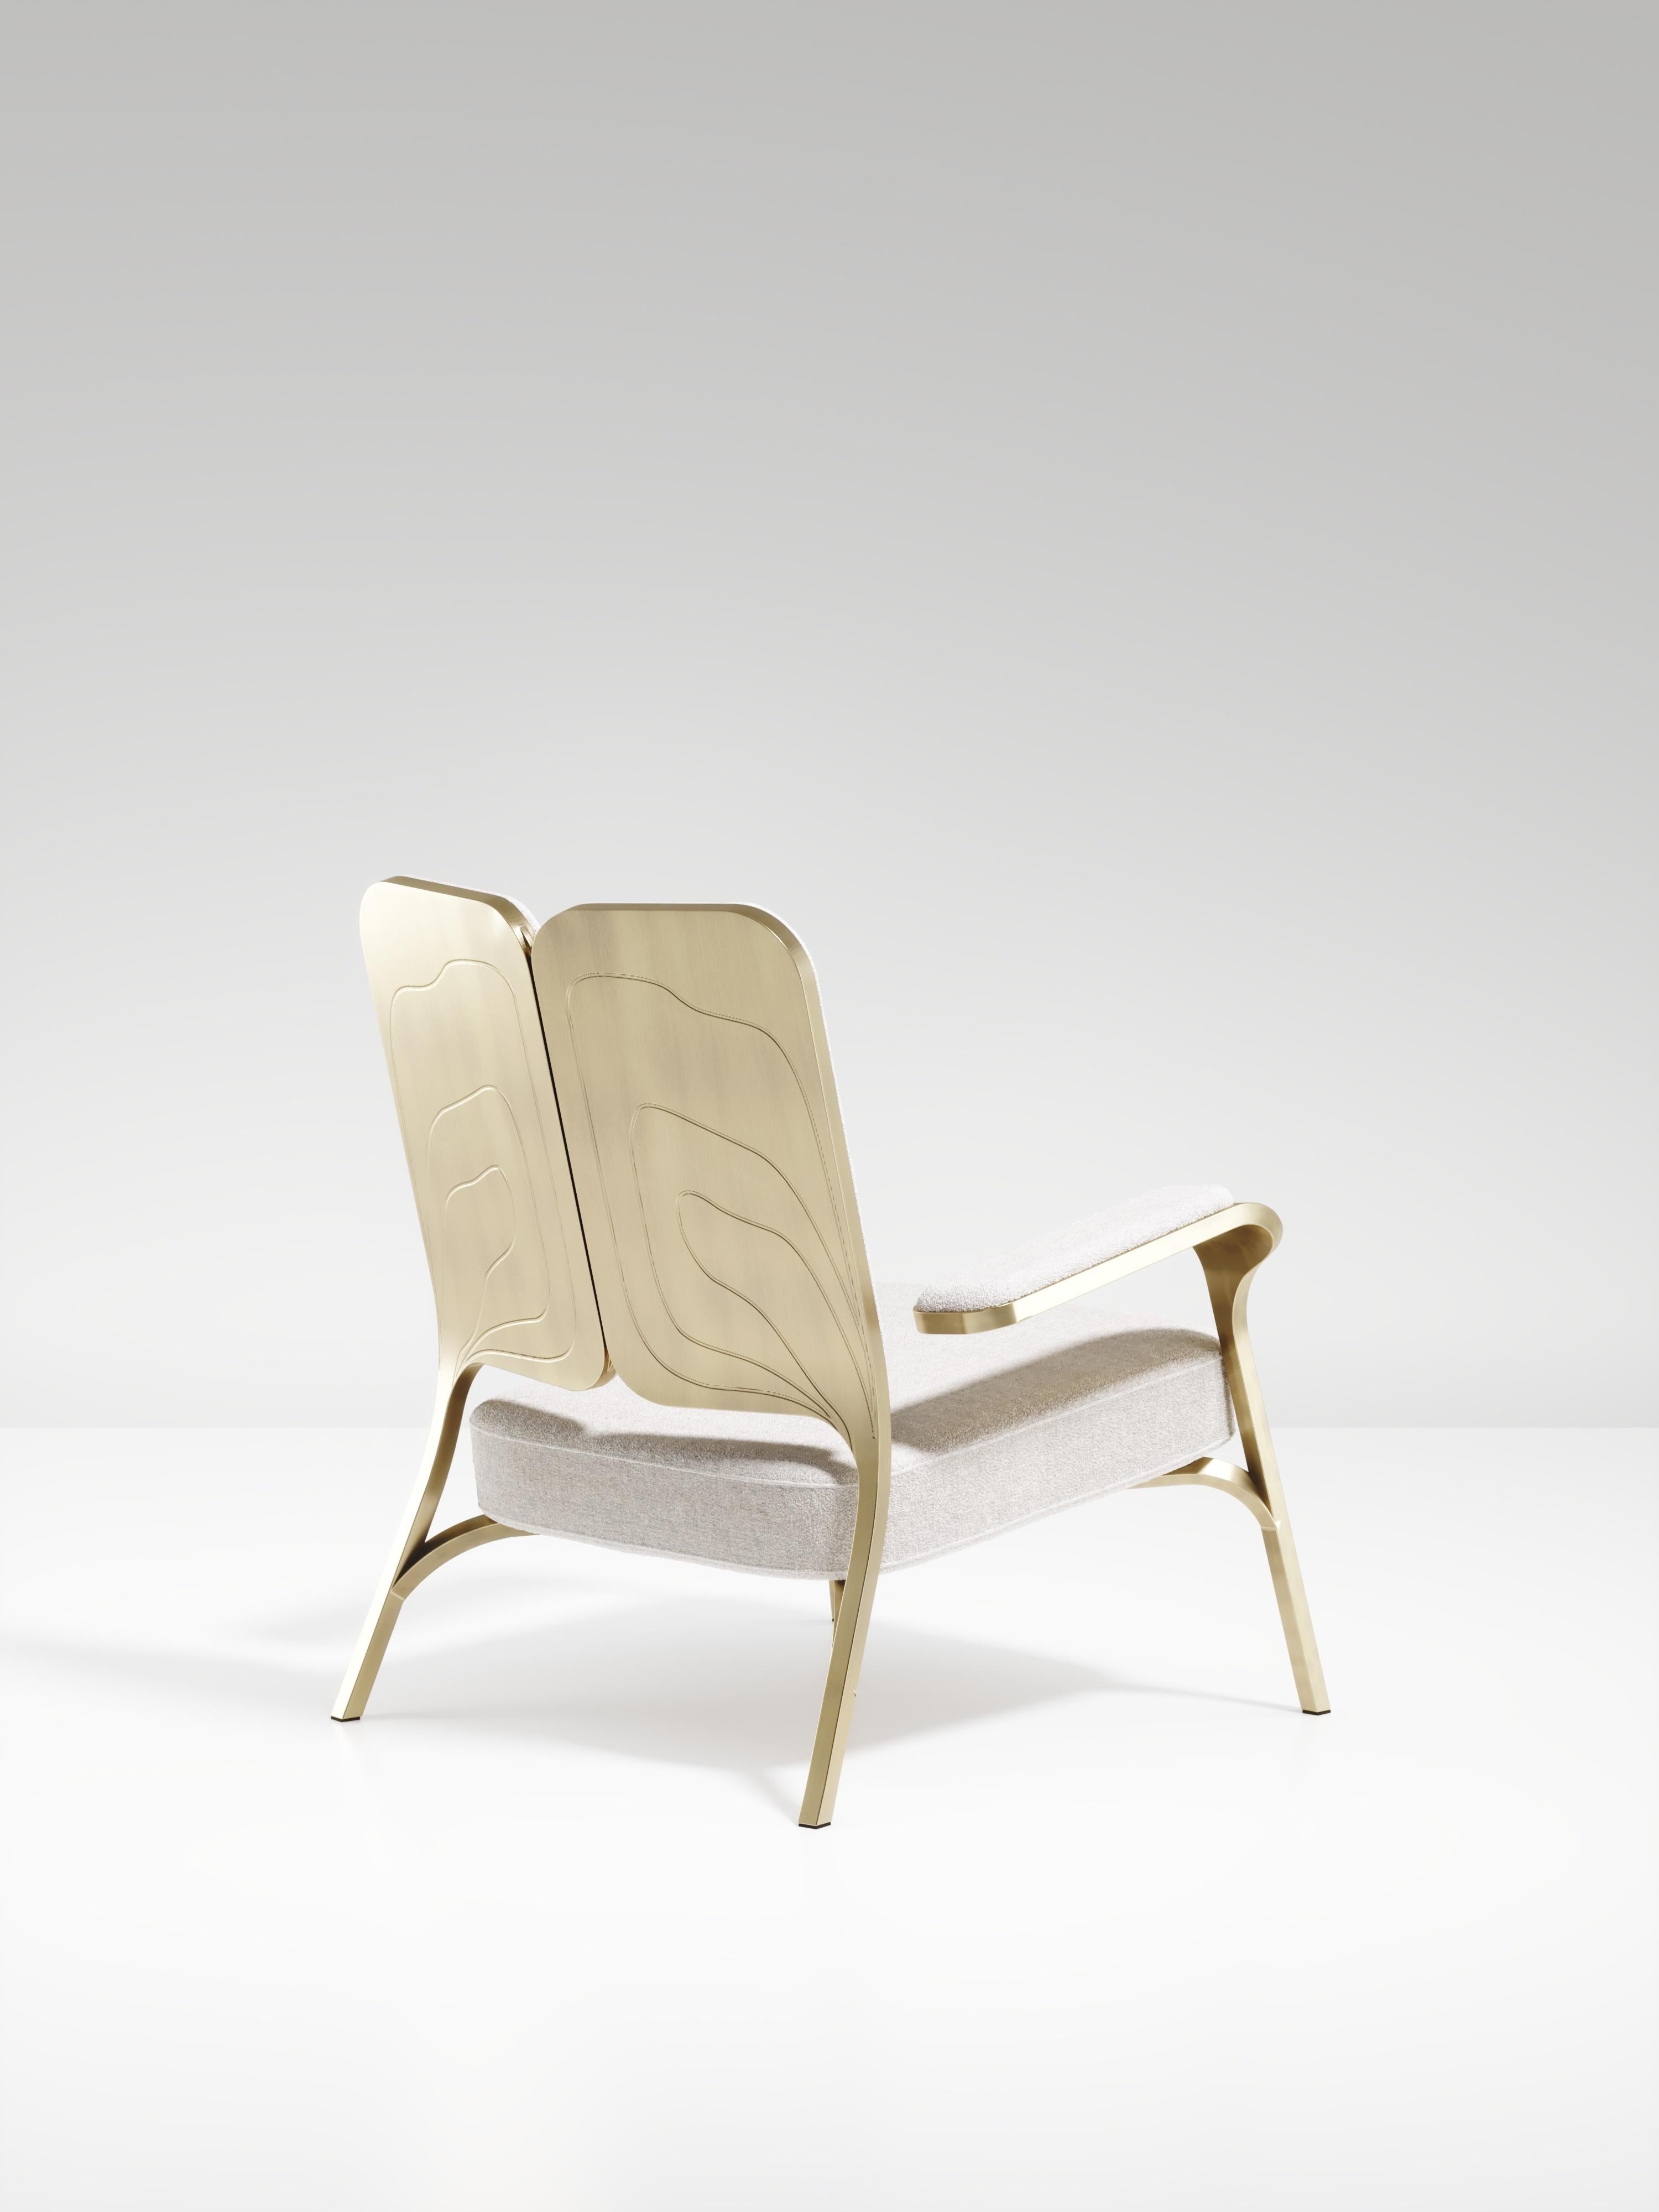 The Gingko armchair by R & Y Augousti is an elegant and whimsical piece. The cream linen upholstered piece provides comfort while exuding a playful aesthetic in its abstract nod to a butterfly with the form of its backrest and intricate engraving